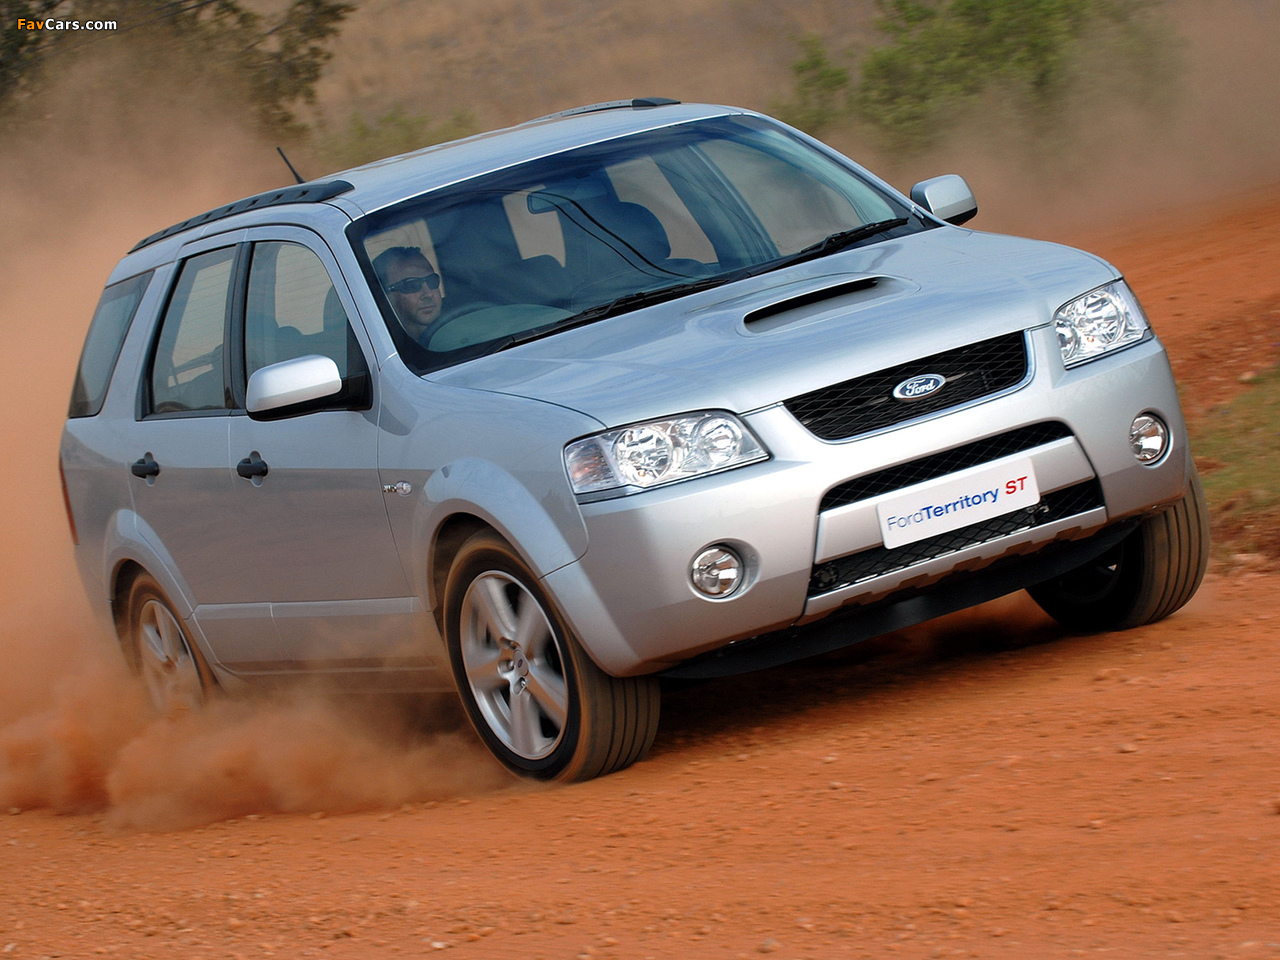 Ford Territory ST (SY) 2006–09 images (1280 x 960)